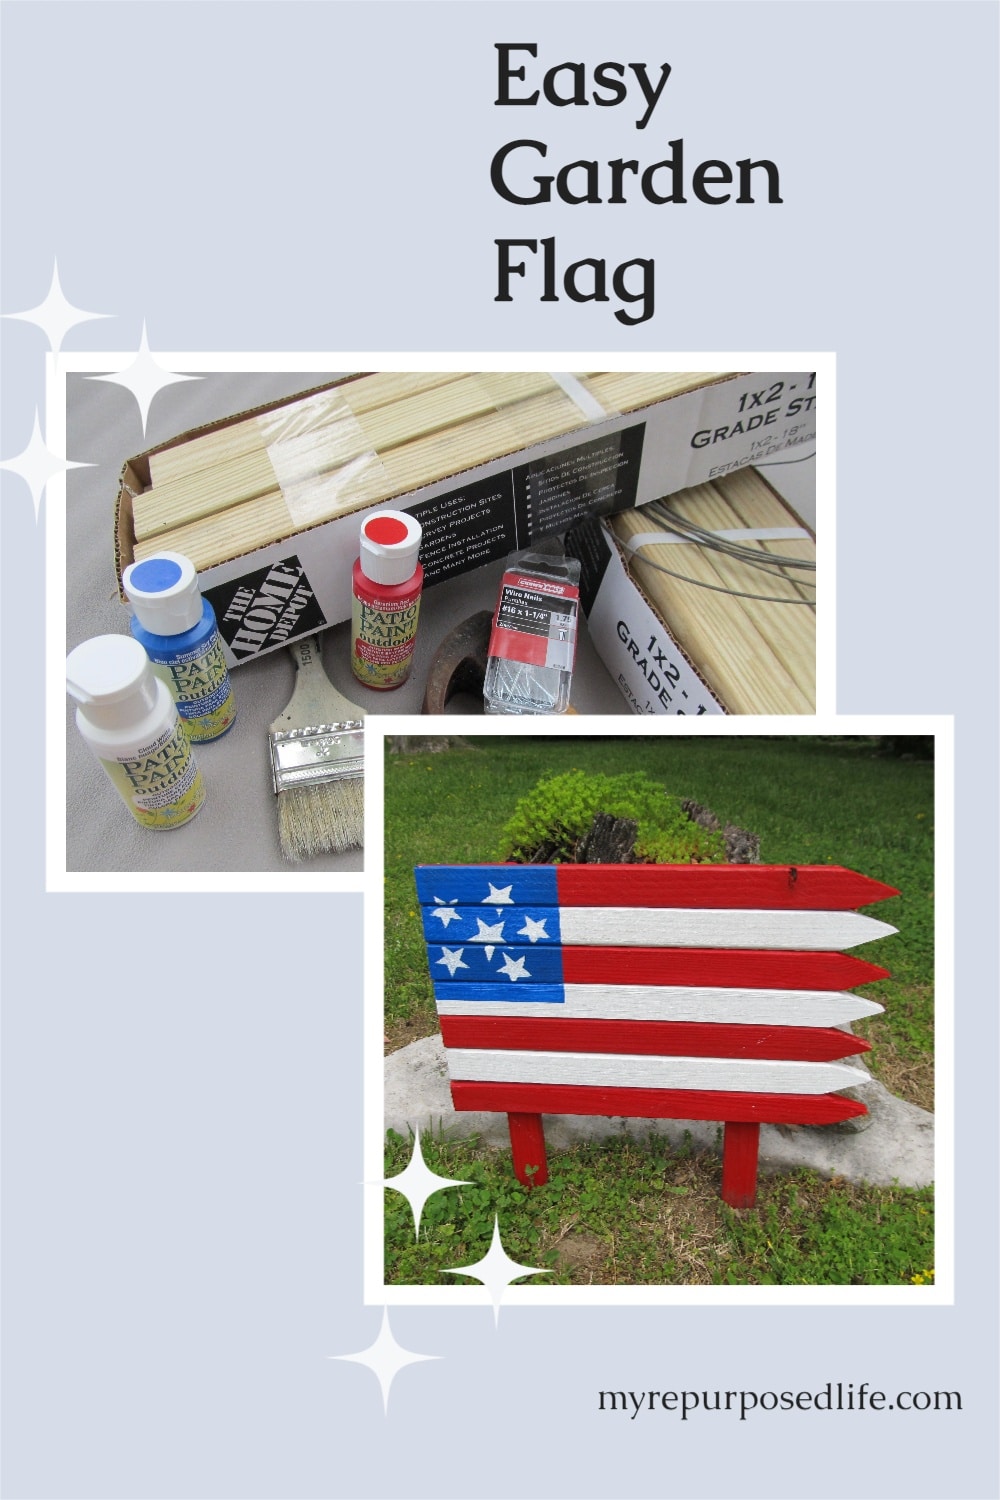 How to make an easy wooden Americana flag for your patio or flower garden. This flag is a quick and easy project using small garden stakes. Great afternoon project to make with the kids for a patriotic holiday celebration. #repurposed #MyRepurposedLife #4thofjuly #patriotic #flag #garden #decor via @repurposedlife